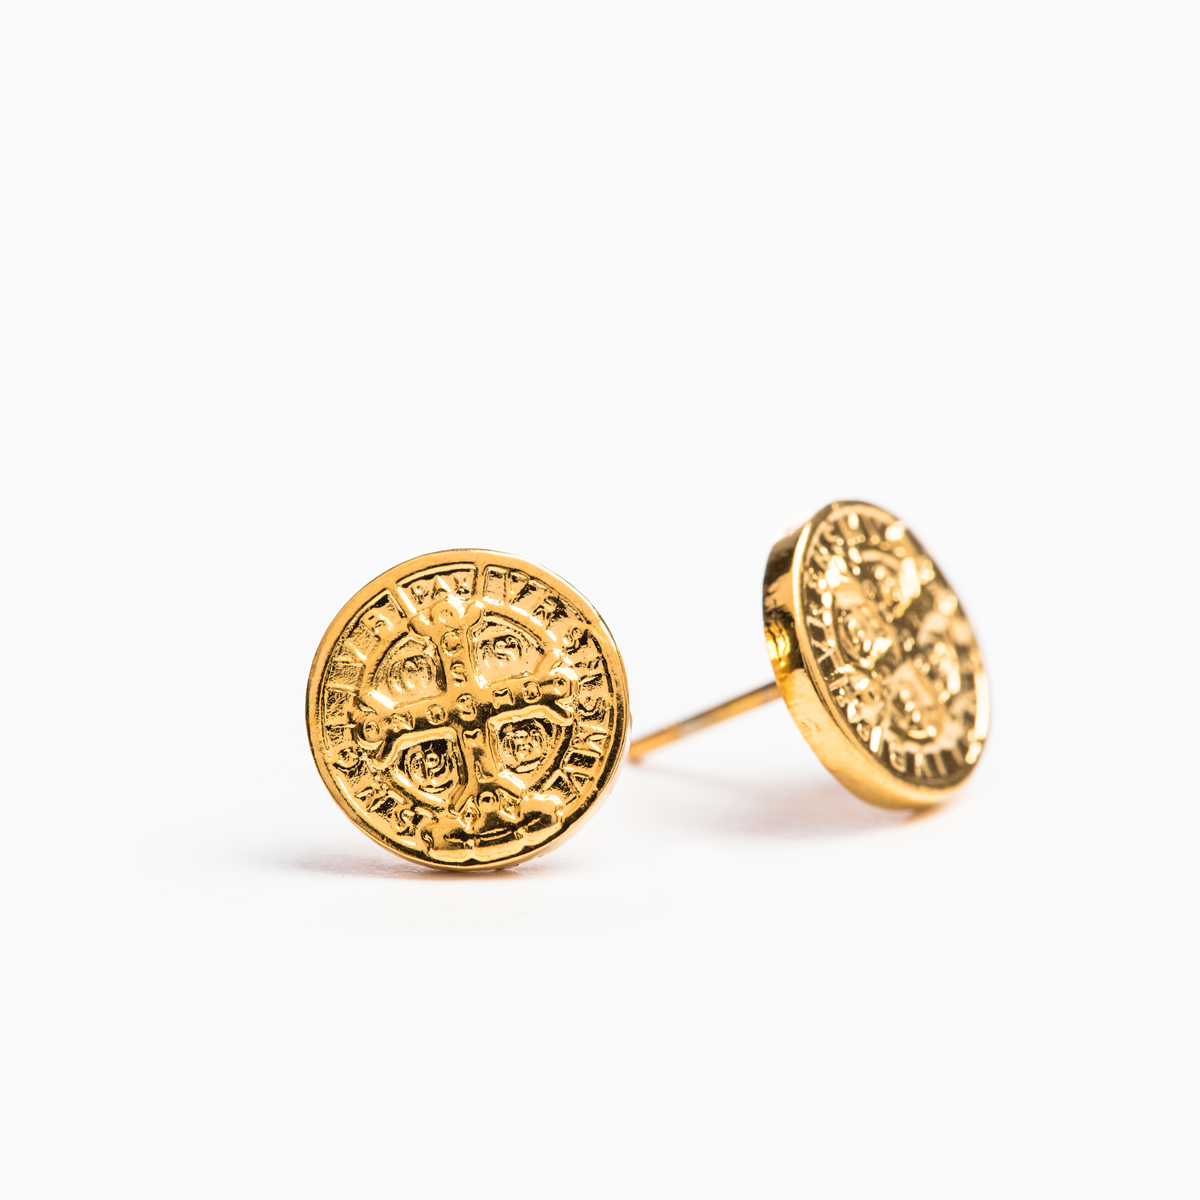 Benedictine Stud Earrings
Wear these earrings as a reminder that God has given you a mission to make the world a better place. You can choose to fulfill this mission by doing good.